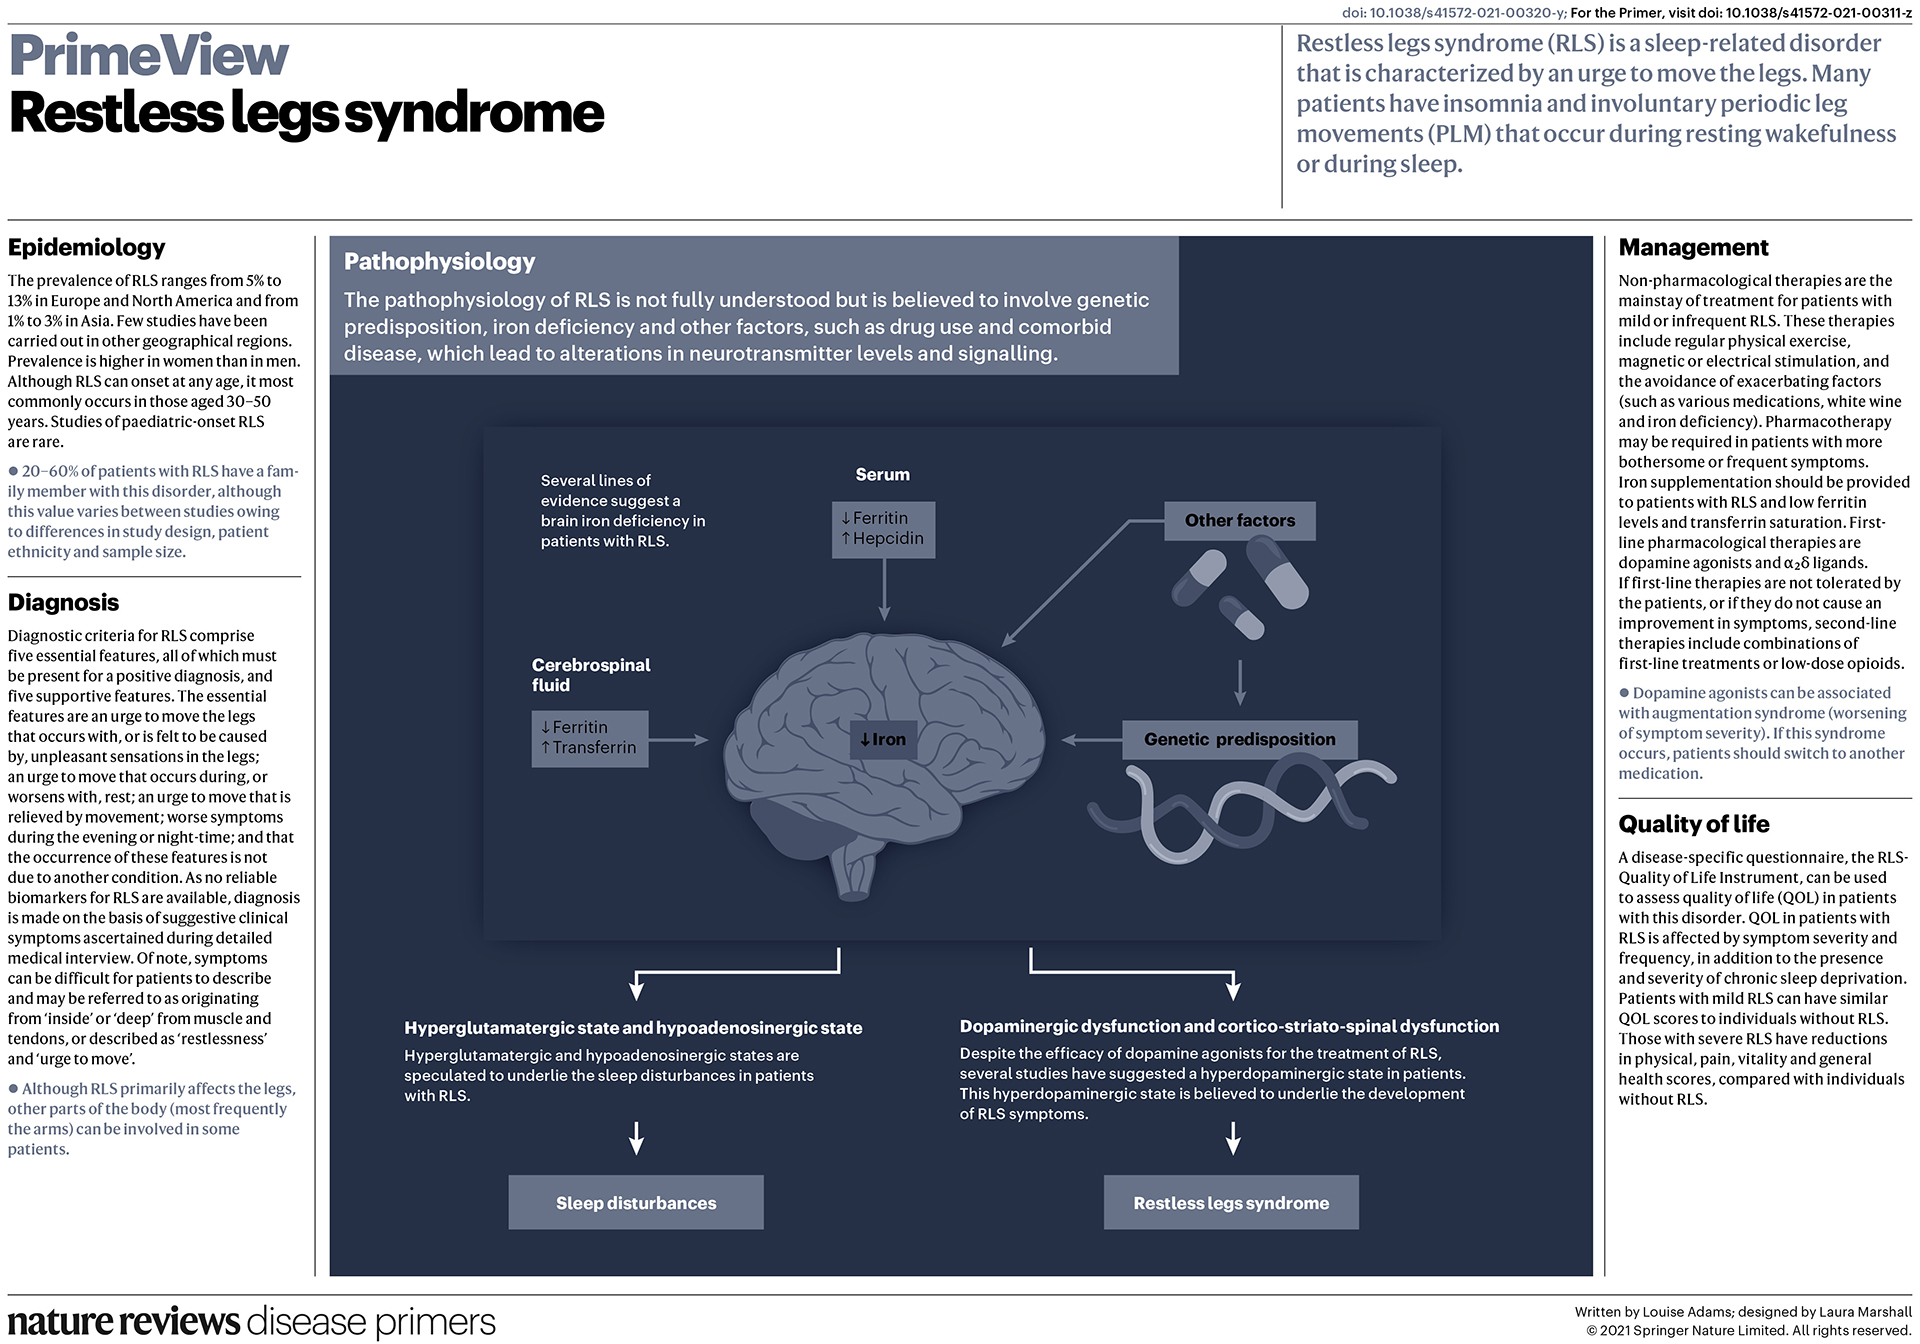 Restless legs syndrome | Nature Reviews Disease Primers